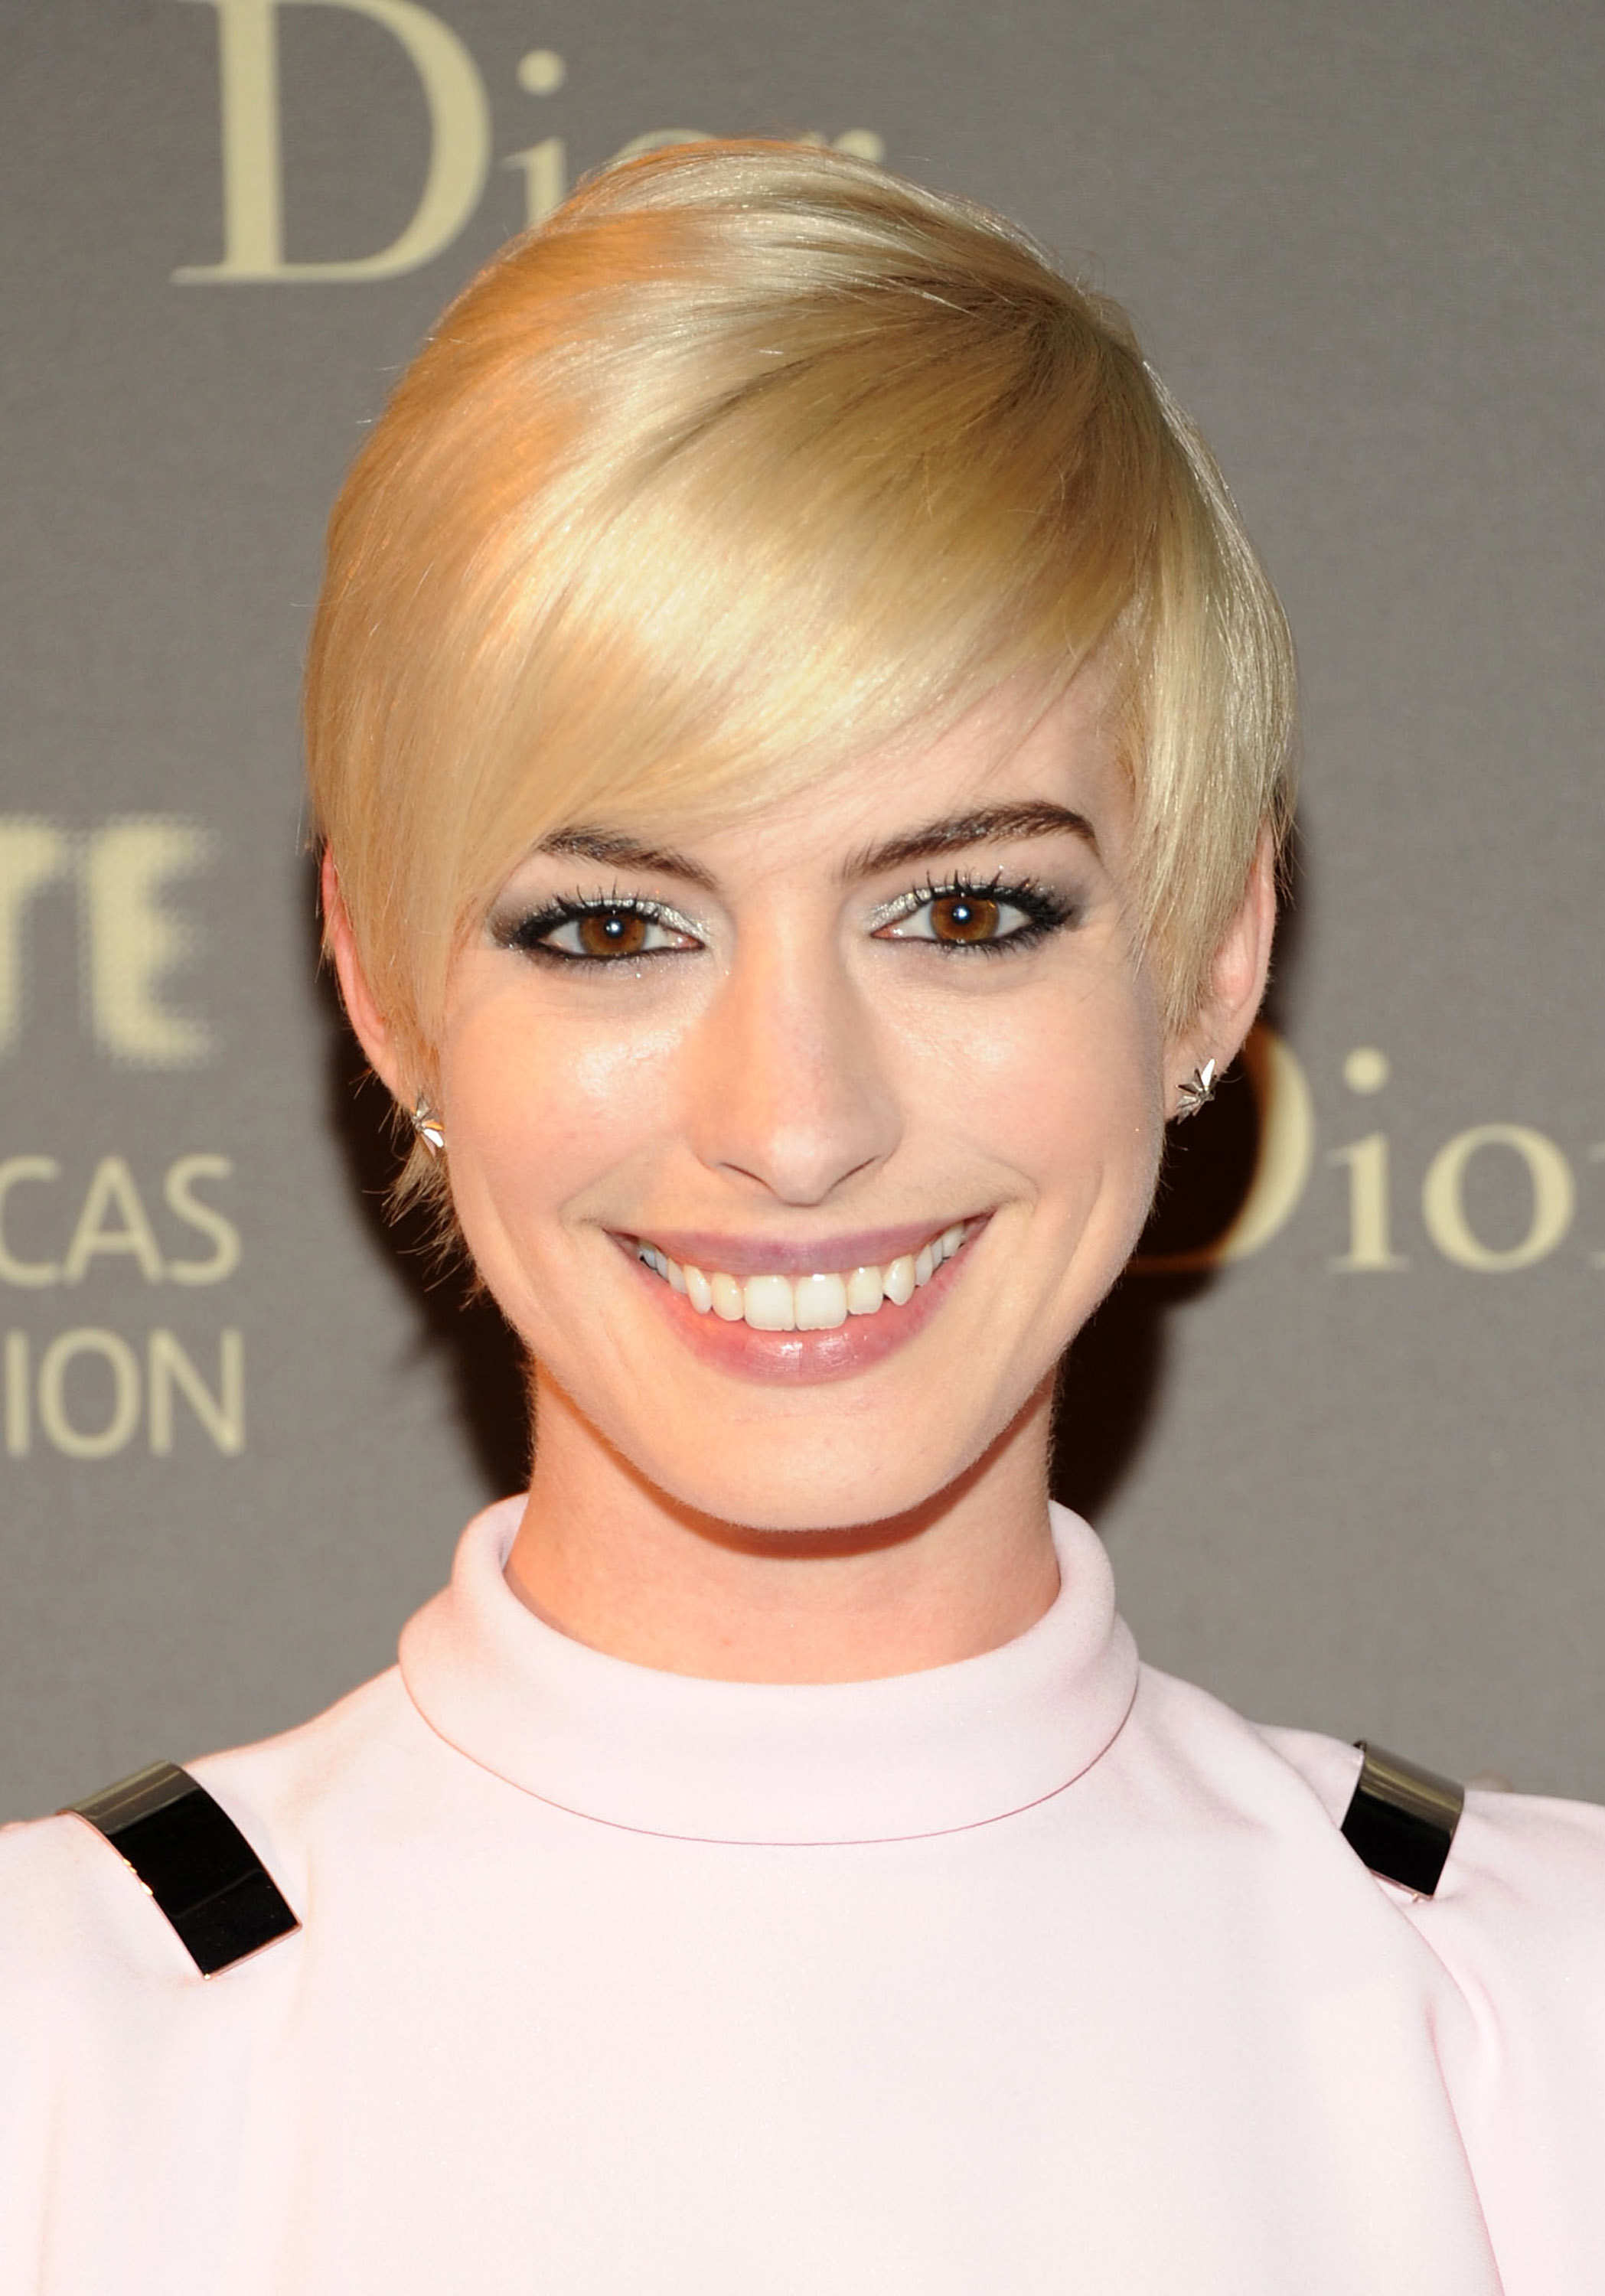 Famous And Best Short Hairstyles Of Celebrities That You Should Know famous and best short hairstyles of celebrities that you should know 18 photo